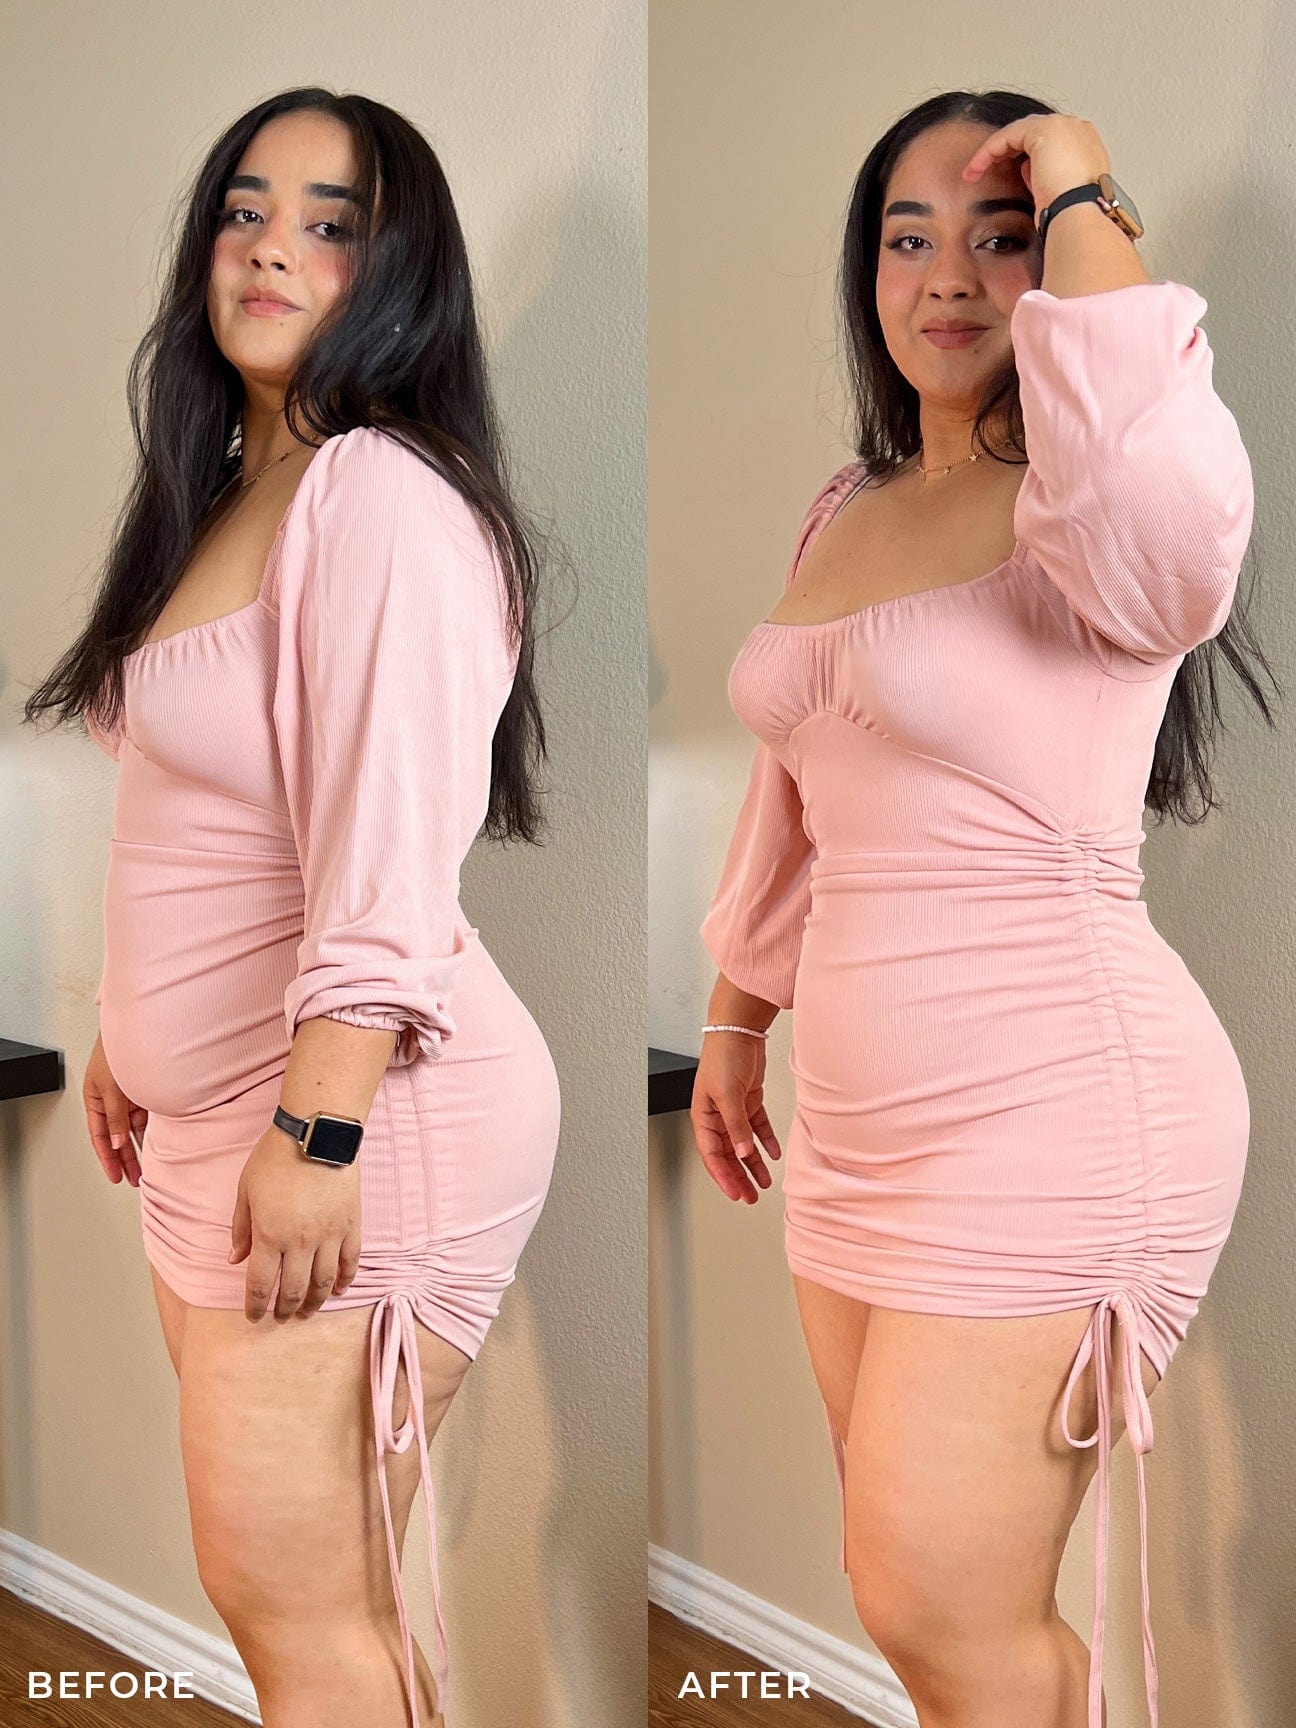 Model wearing invisible body suit with panty under pink dress.